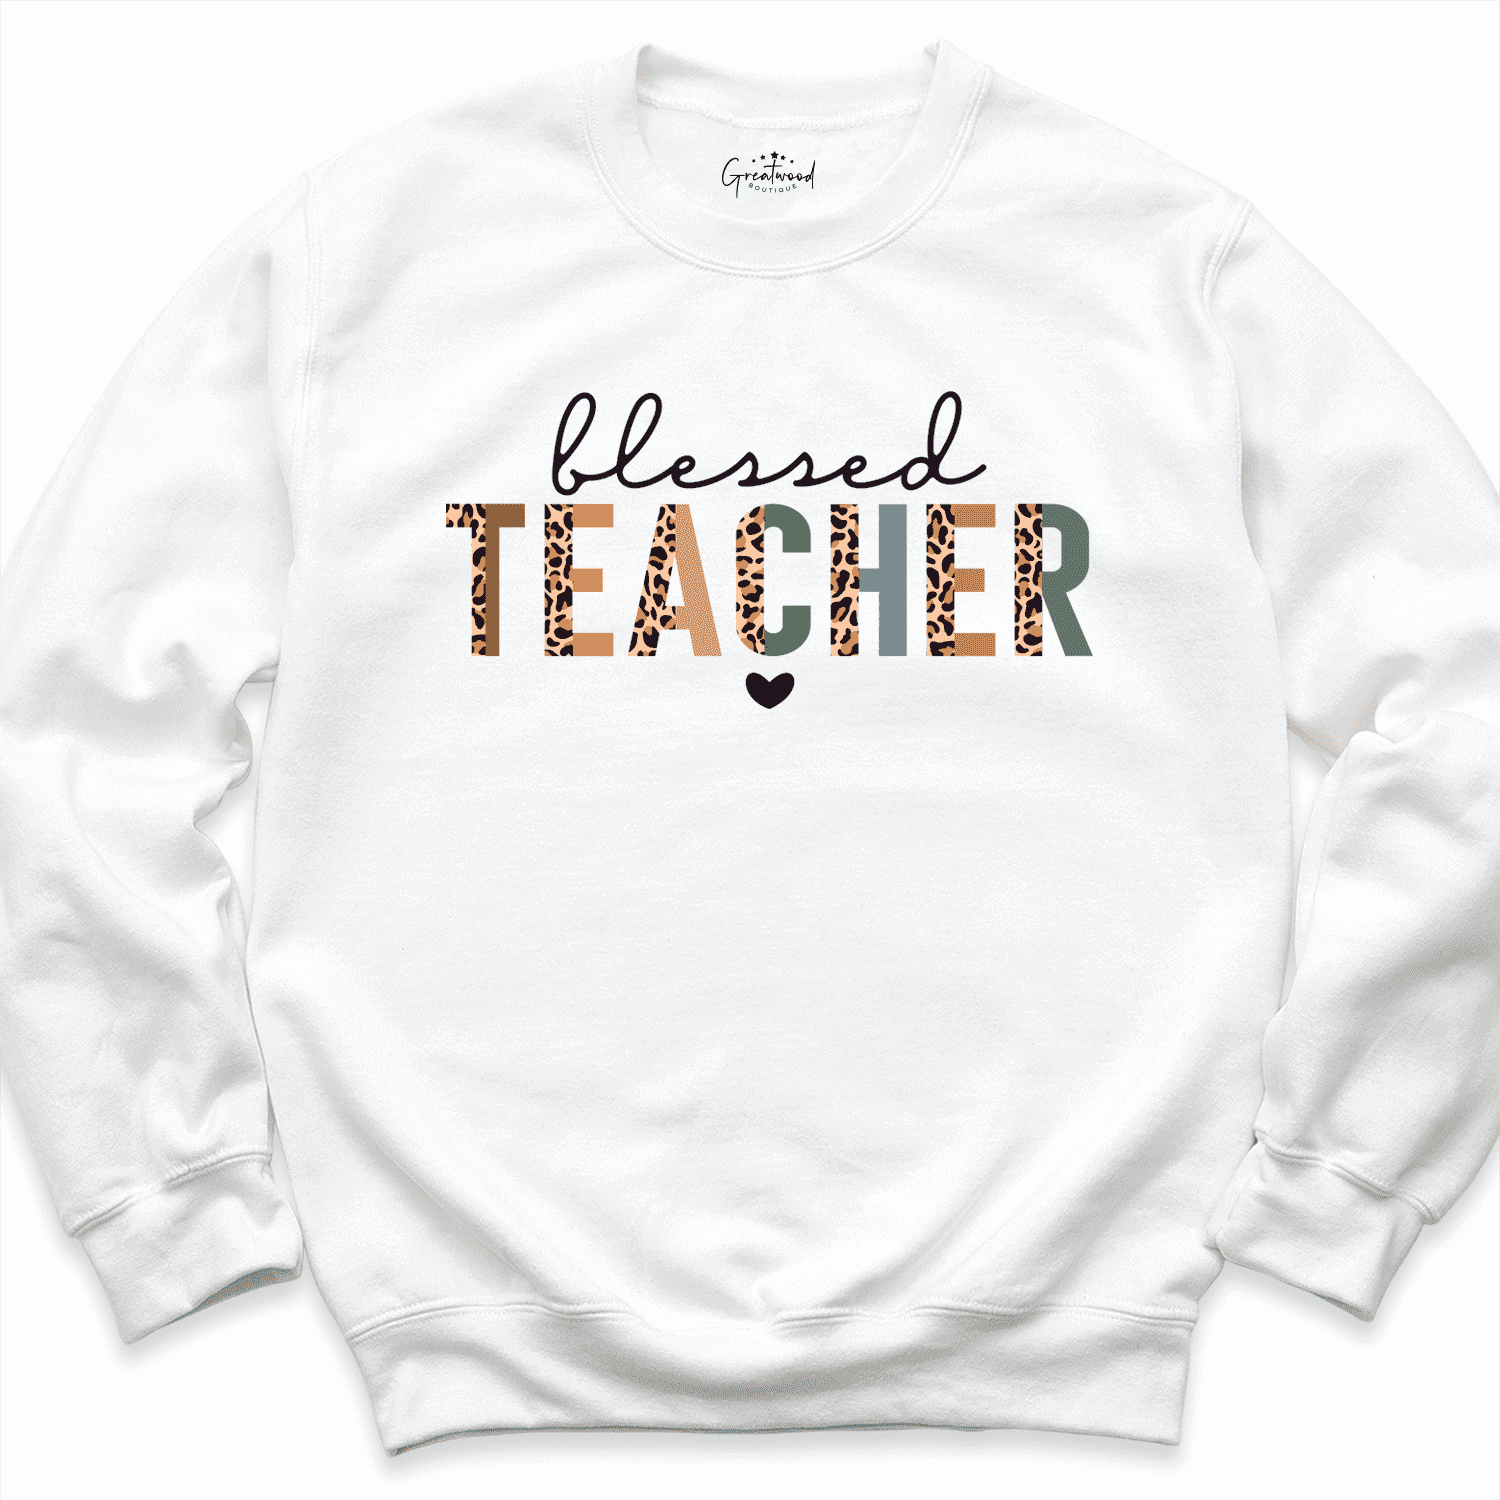 Blessed Teacher Sweatshirt White - Greatwood Boutique